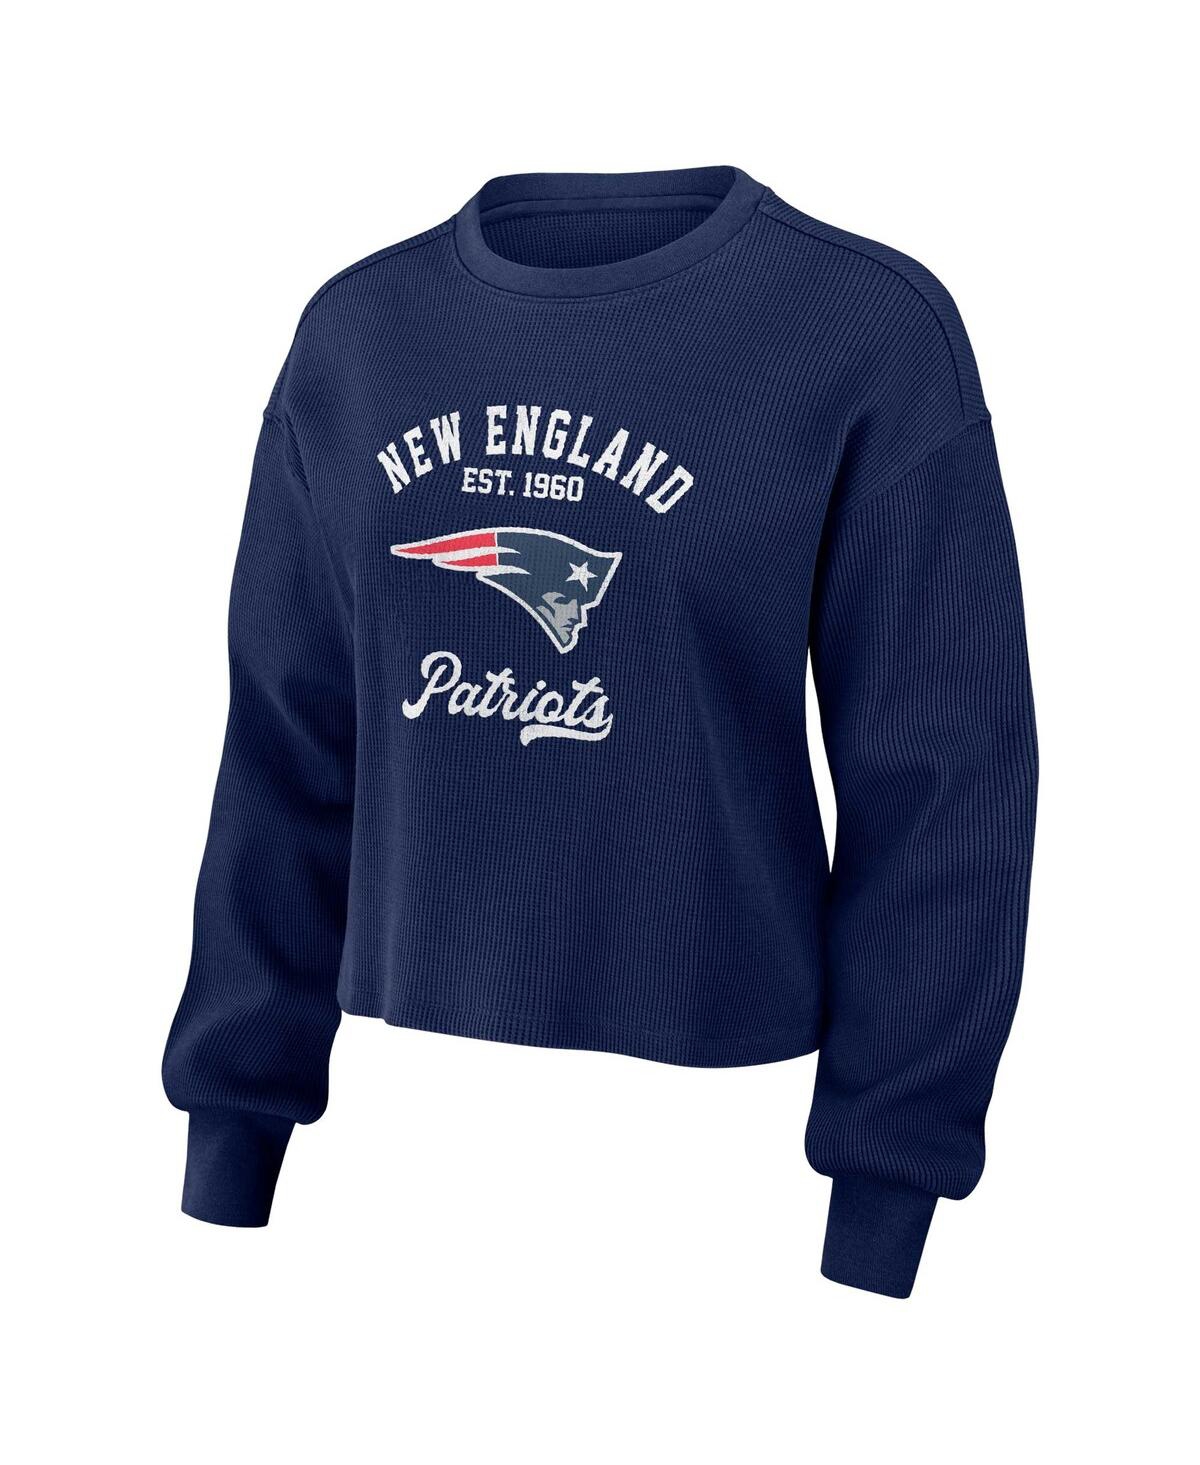 Shop Wear By Erin Andrews Women's  Navy Distressed New England Patriots Waffle Knit Long Sleeve T-shirt An